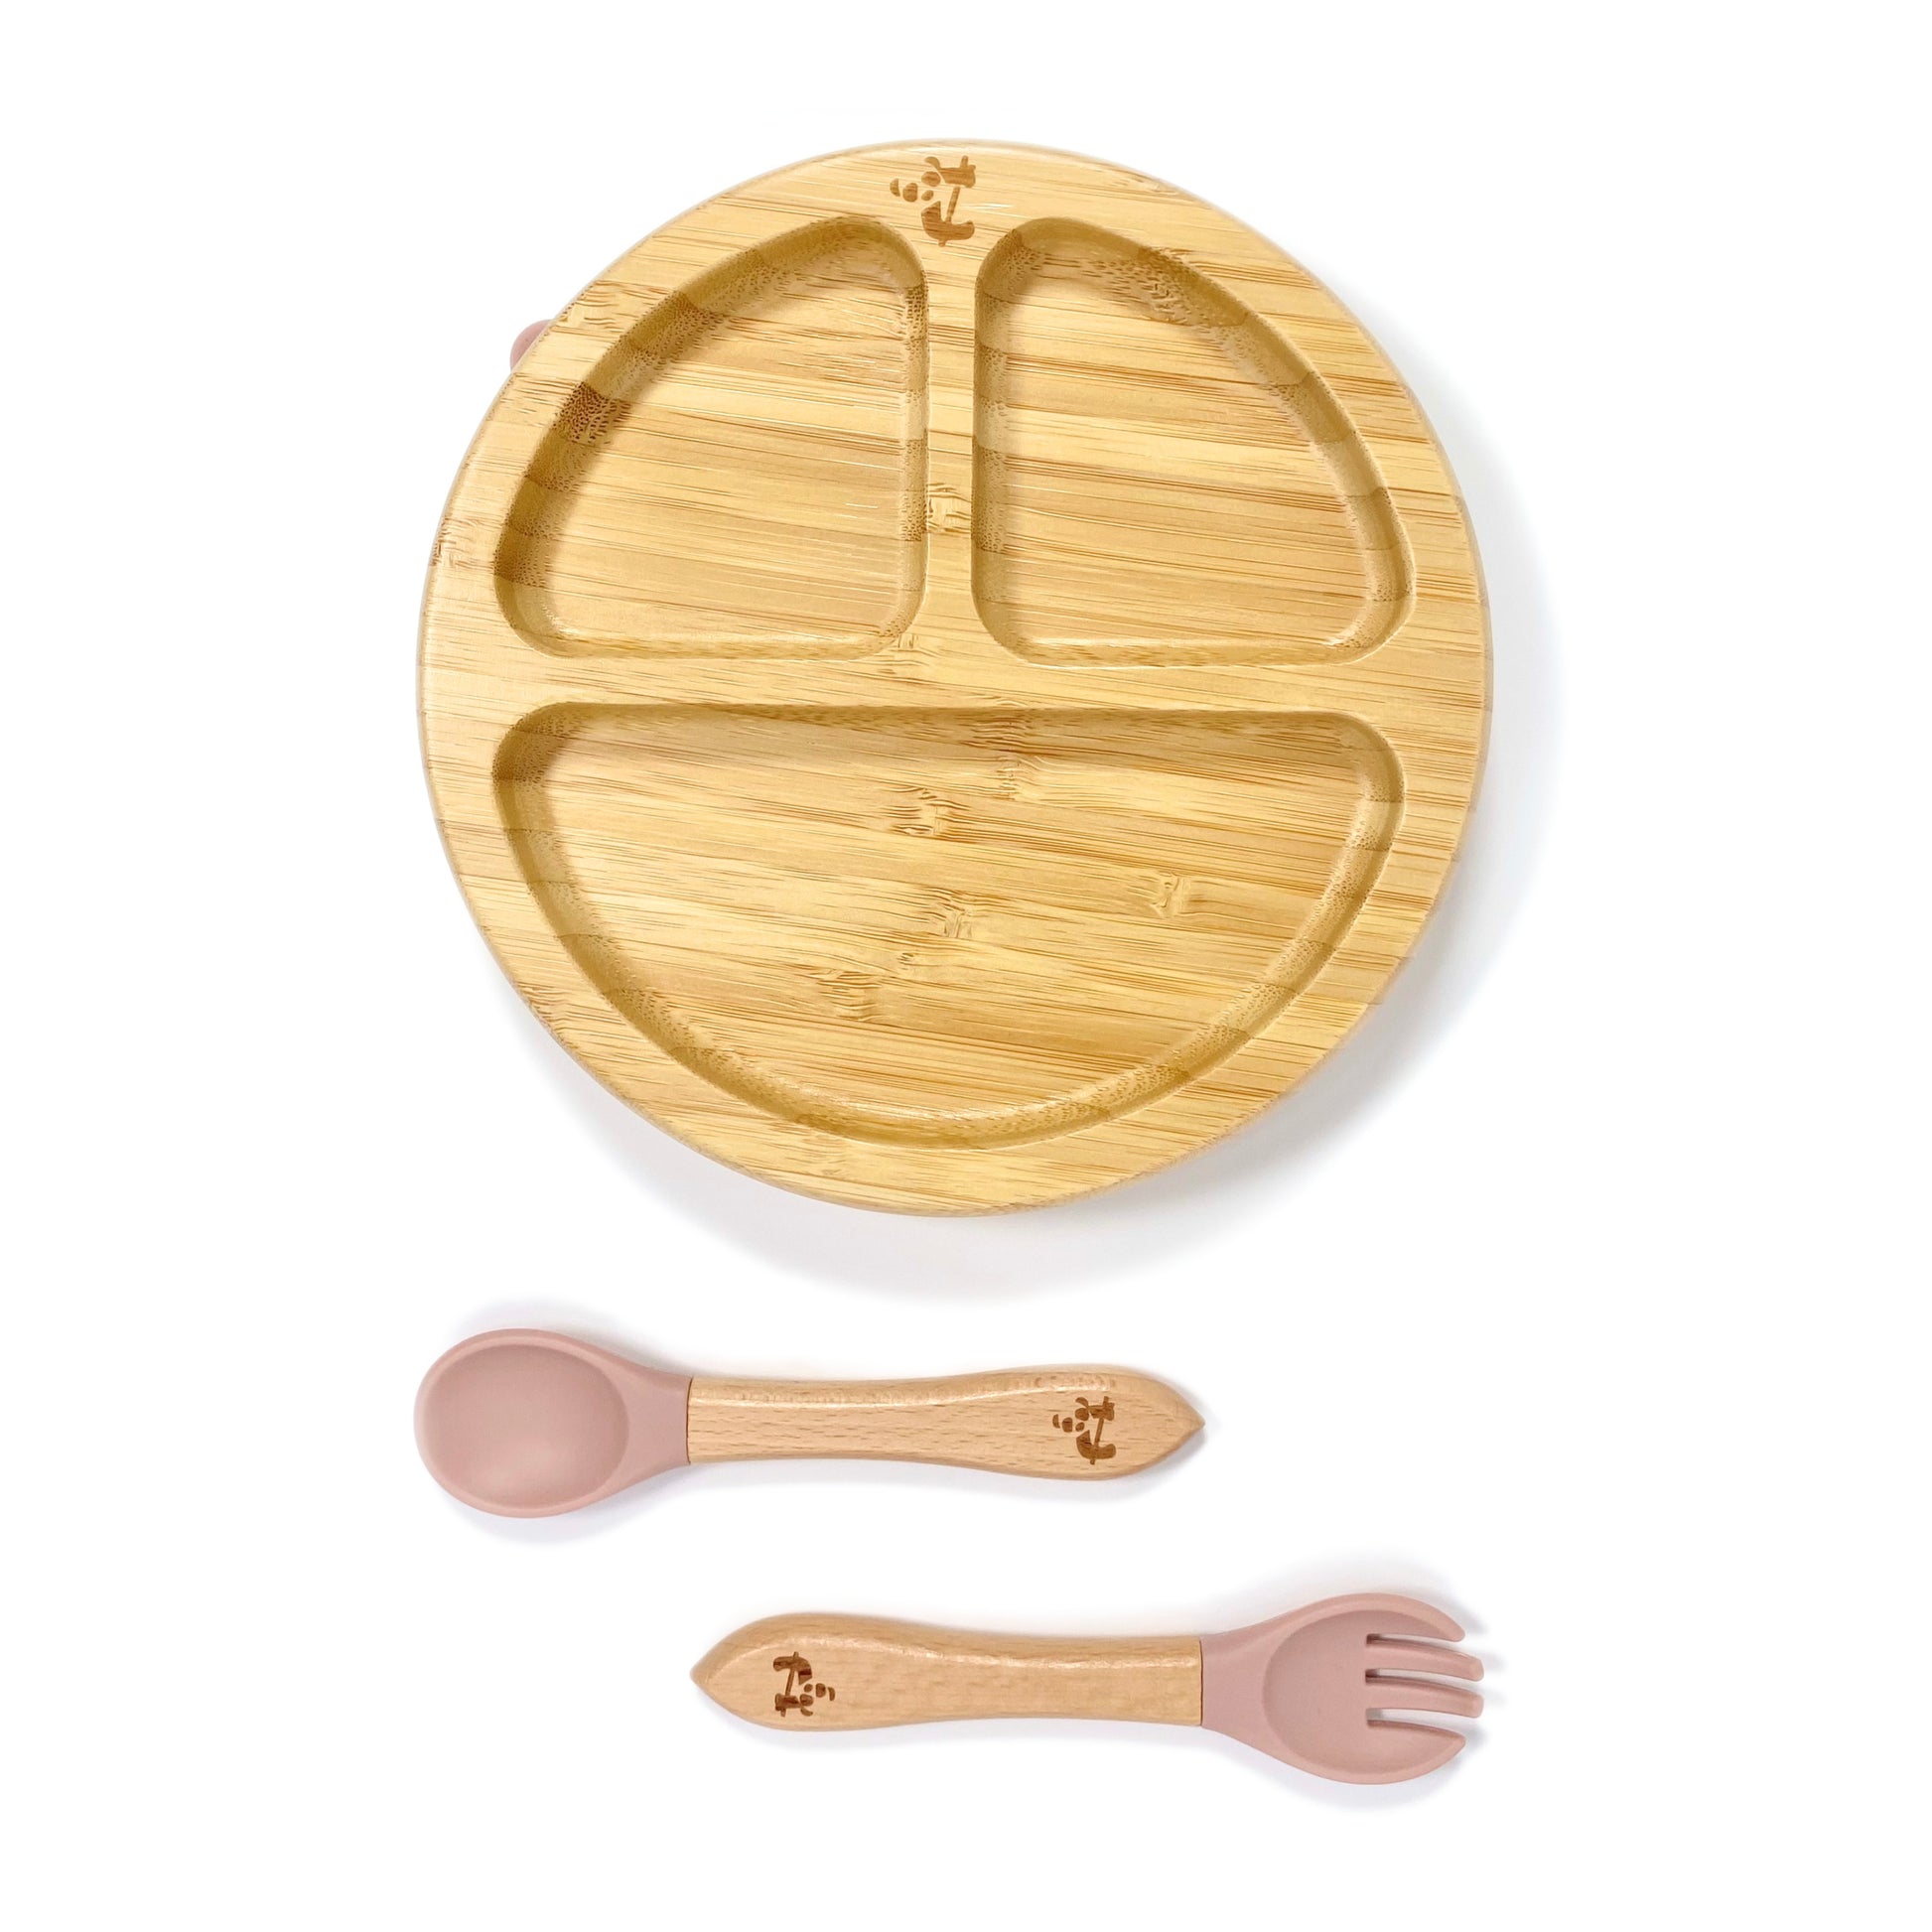 A children’s bamboo tableware set, including bamboo section plate with blossom pink silicone suction ring, and matching bamboo and silicone cutlery.